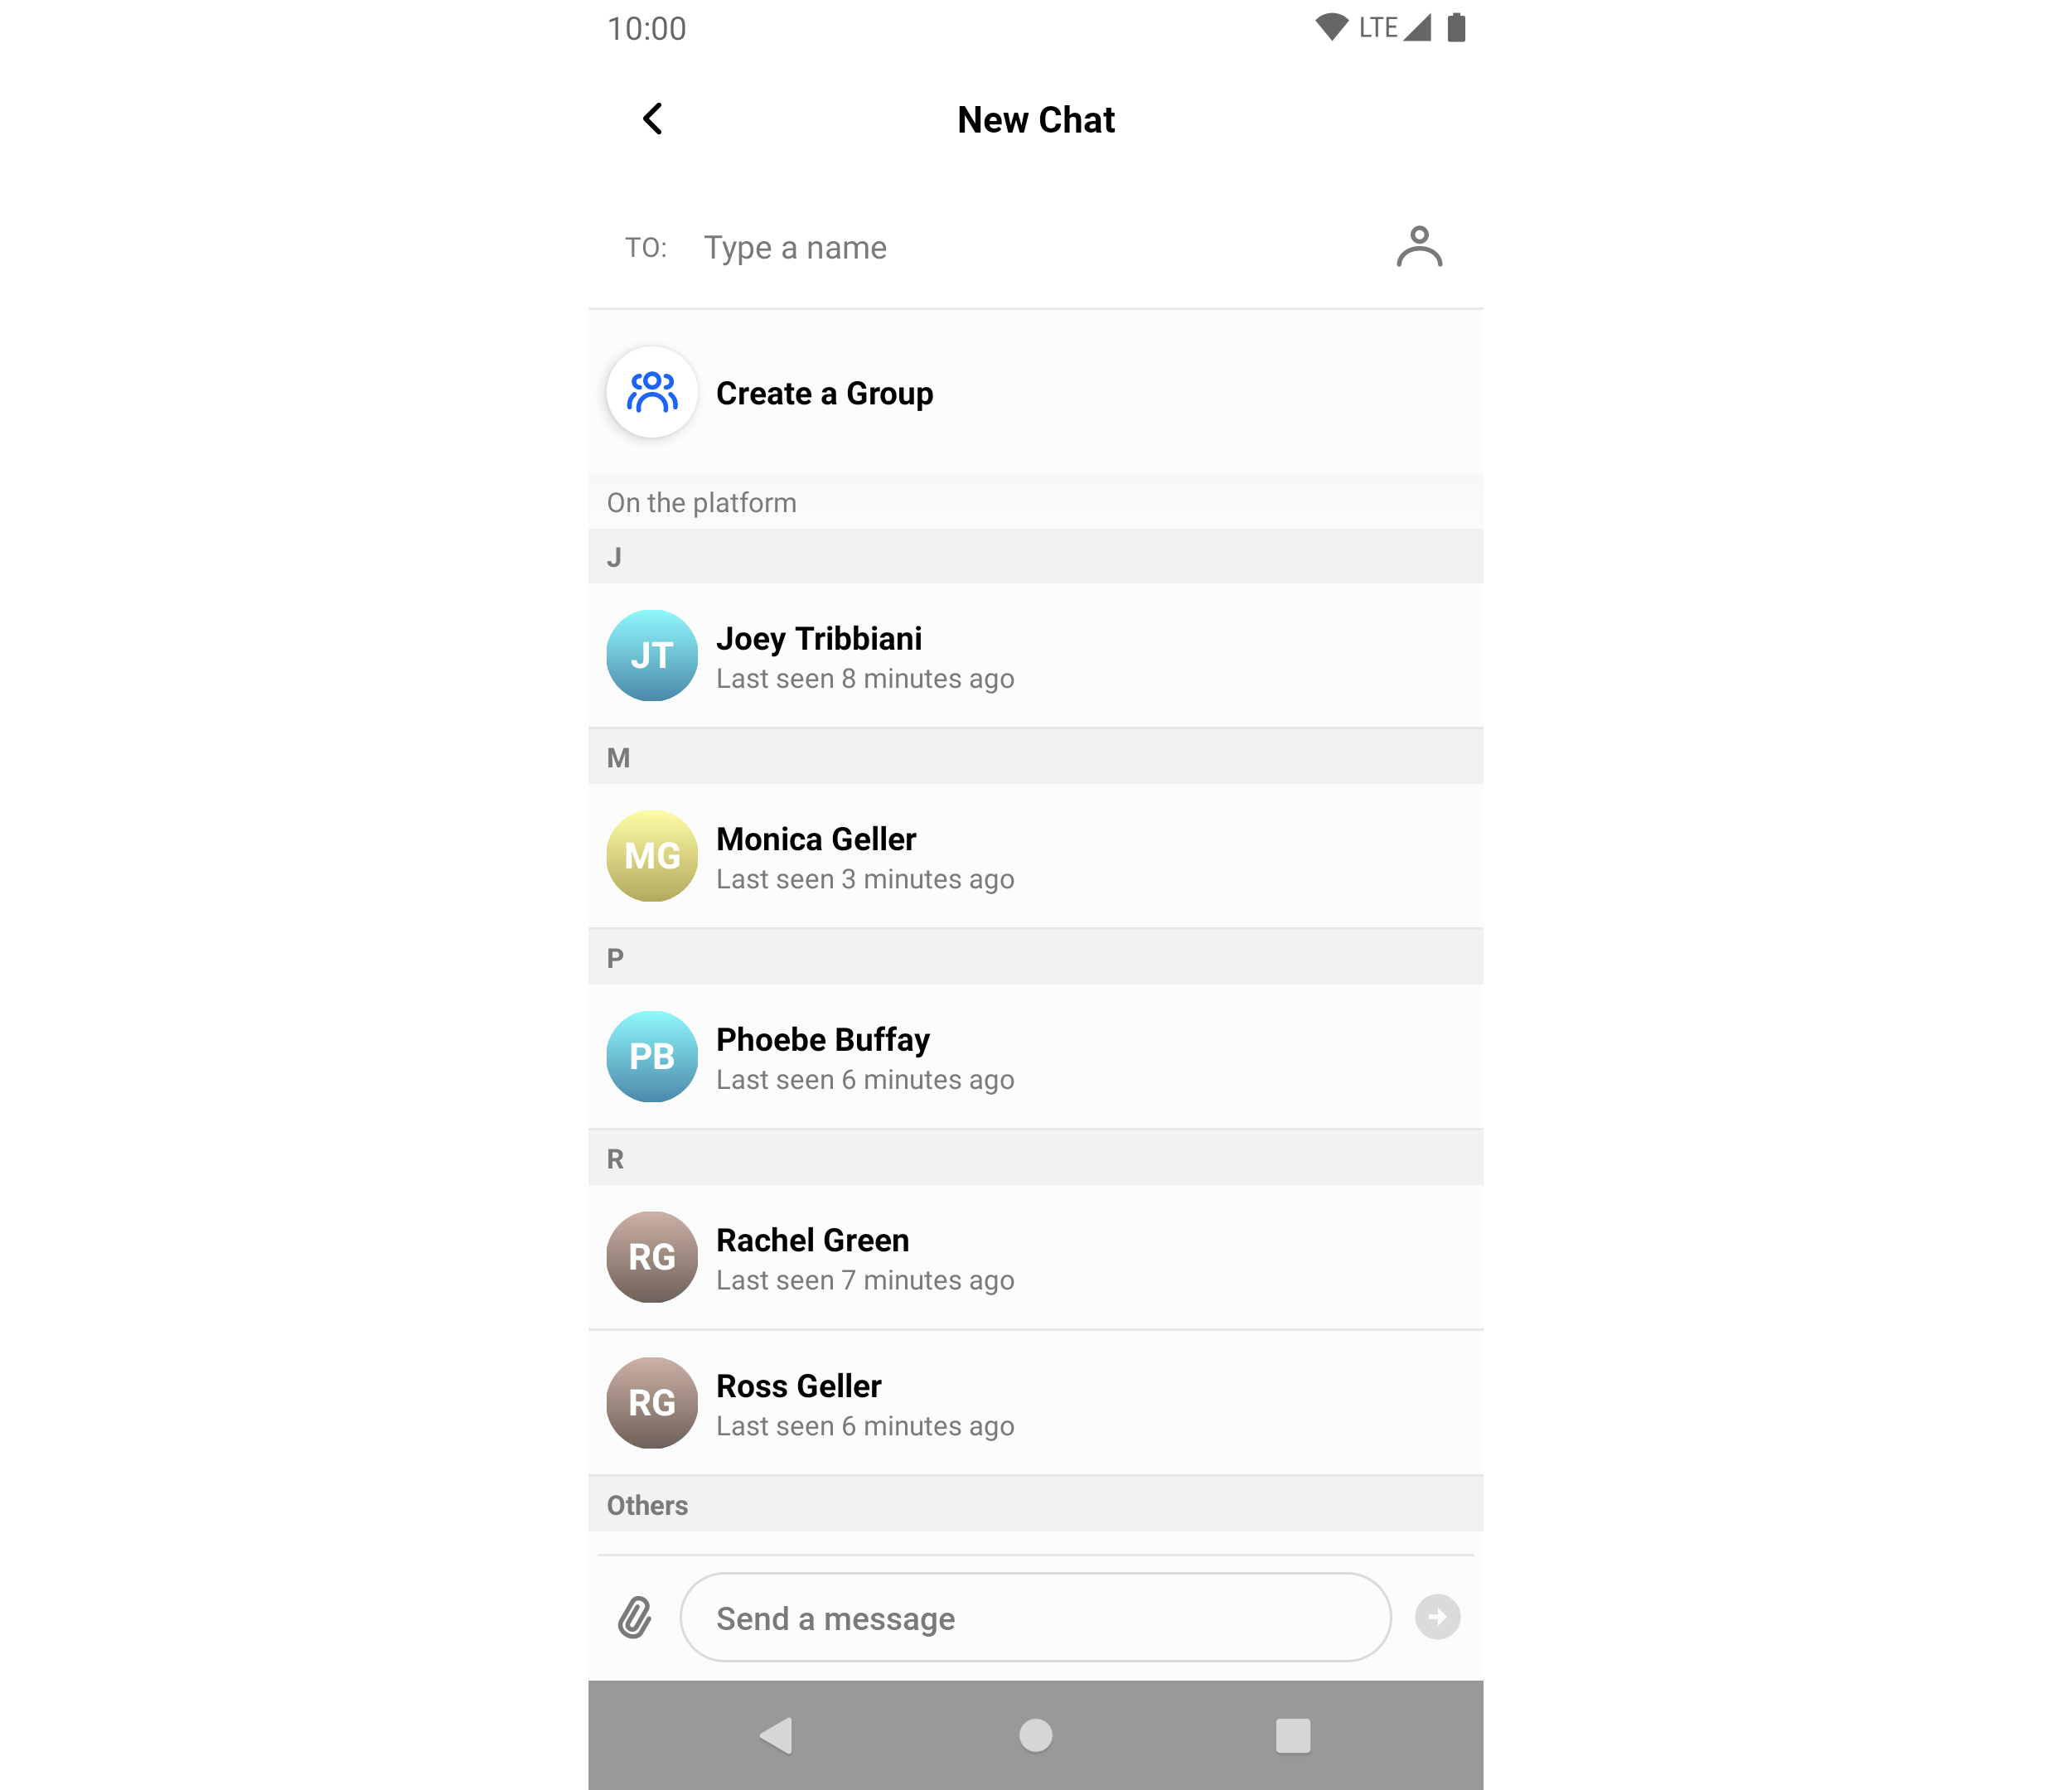 The list of users in the sample app